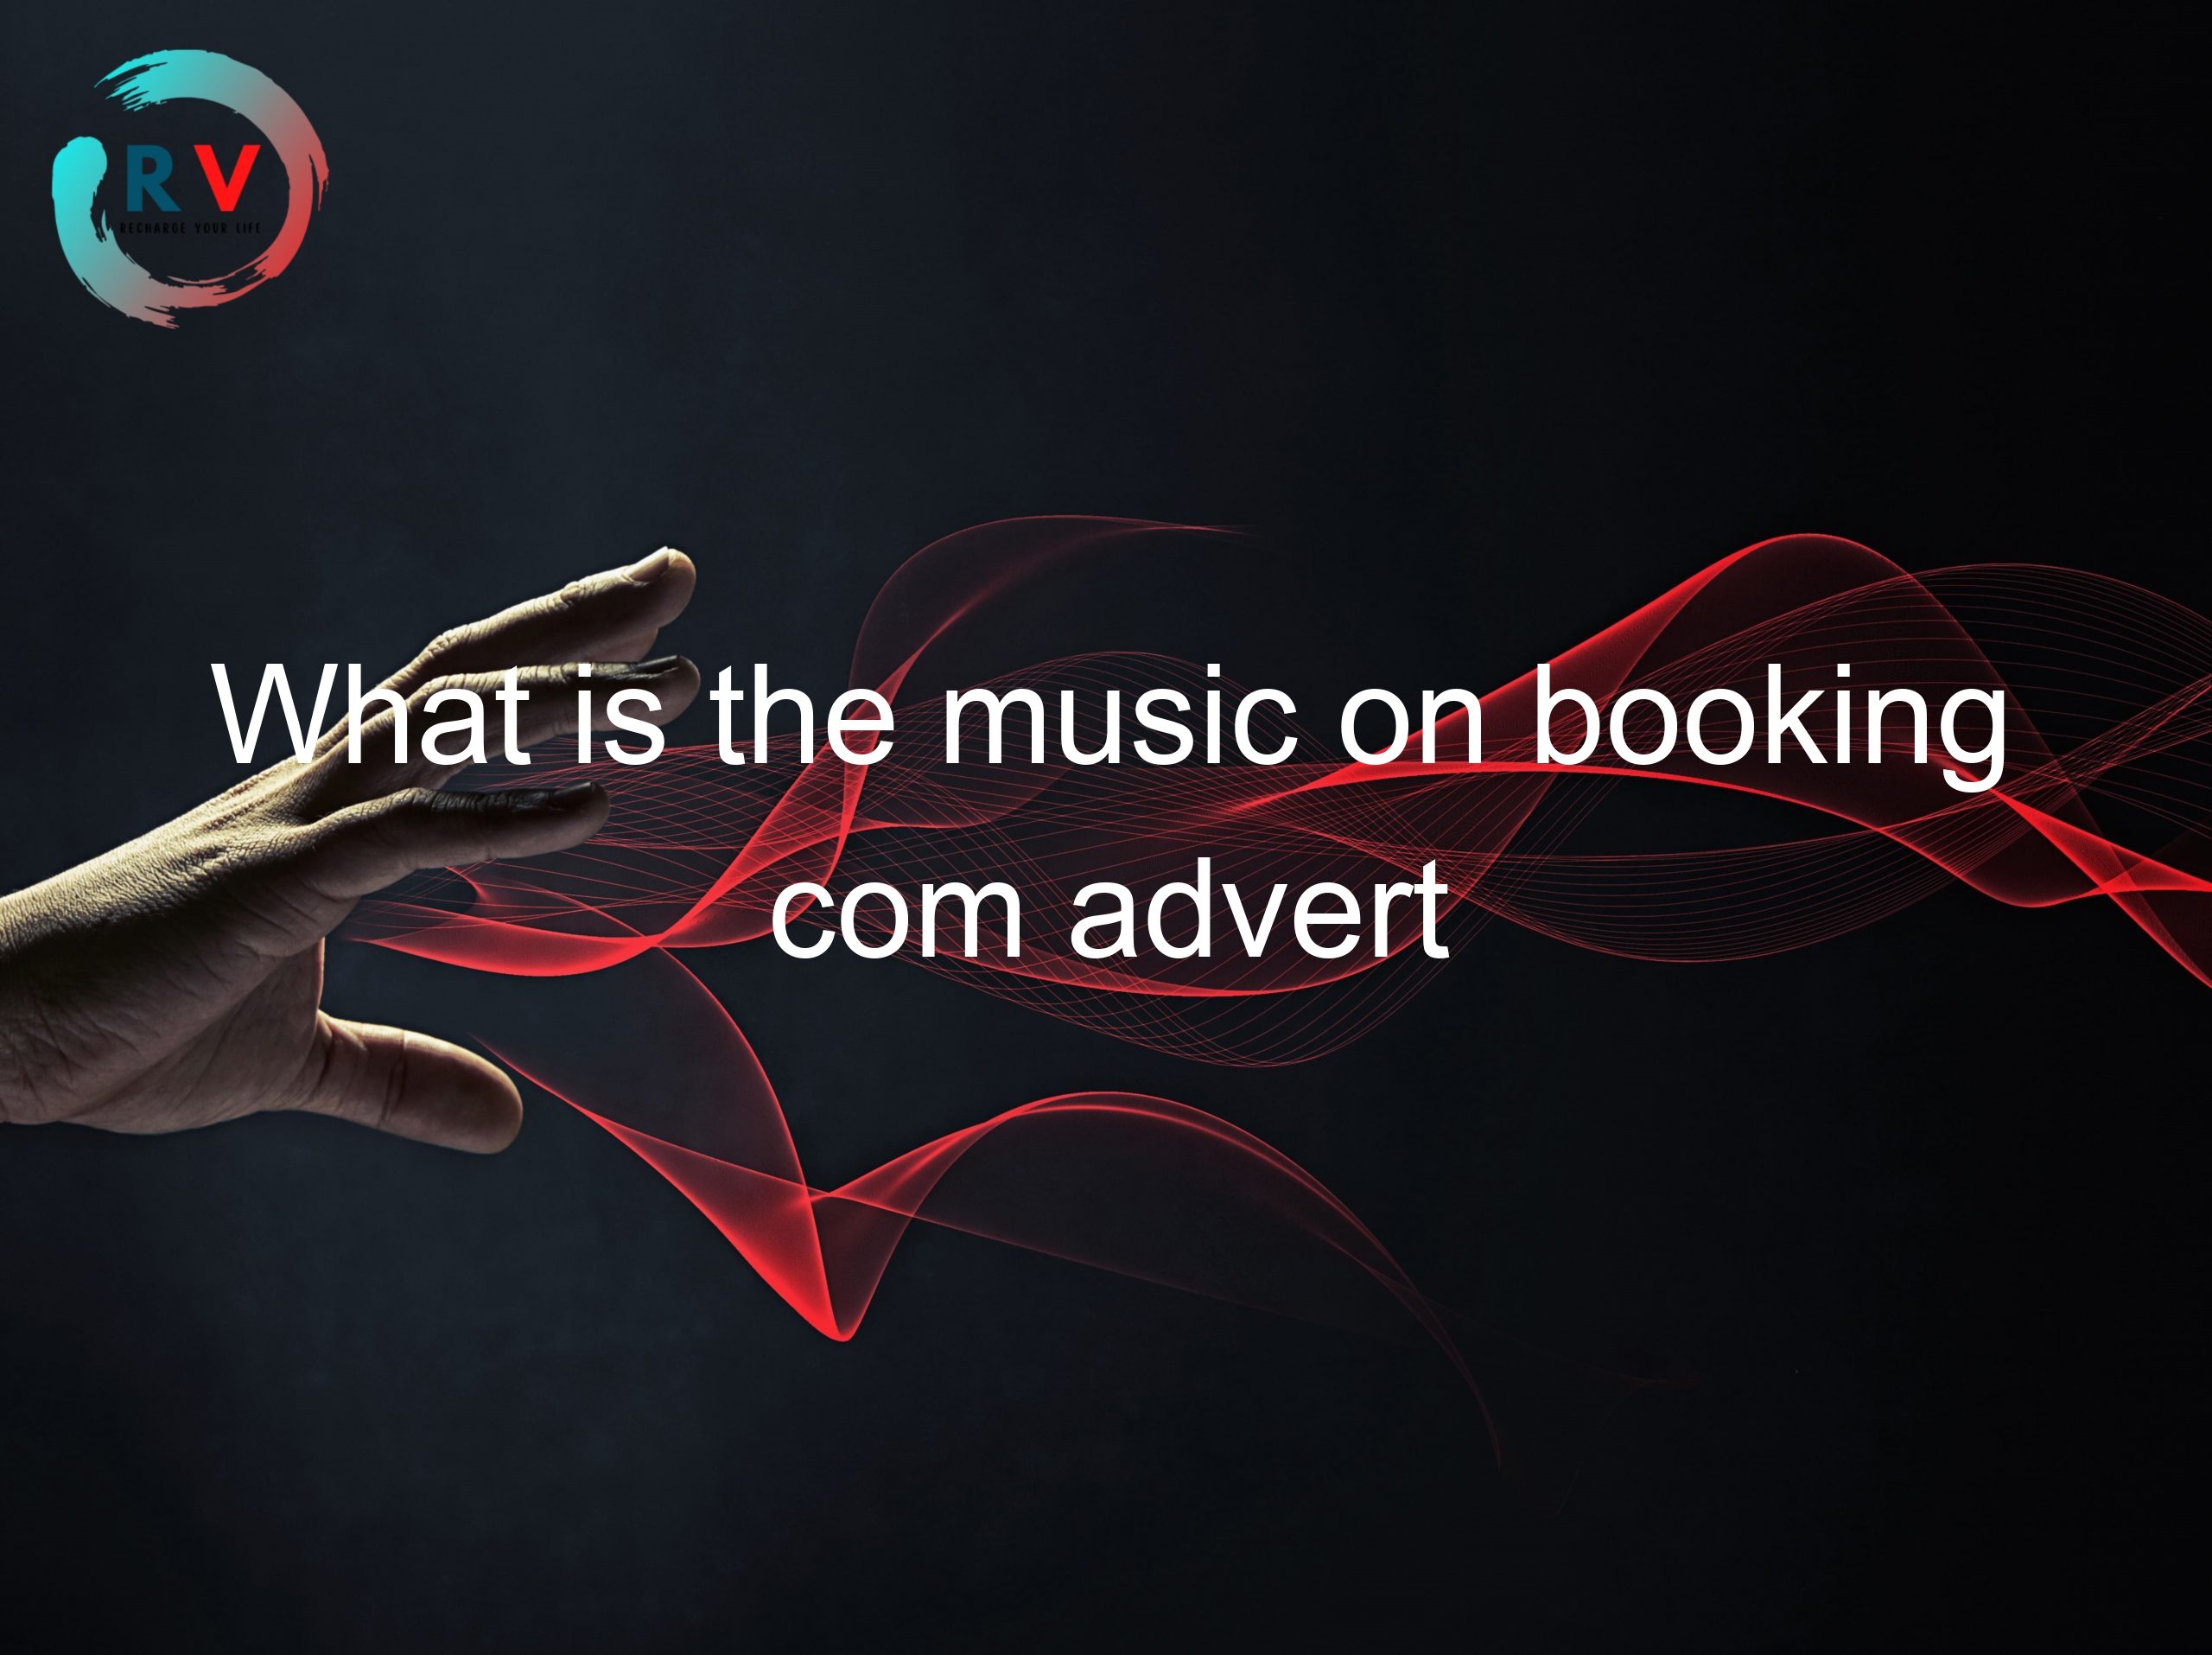 What is the music on booking com advert